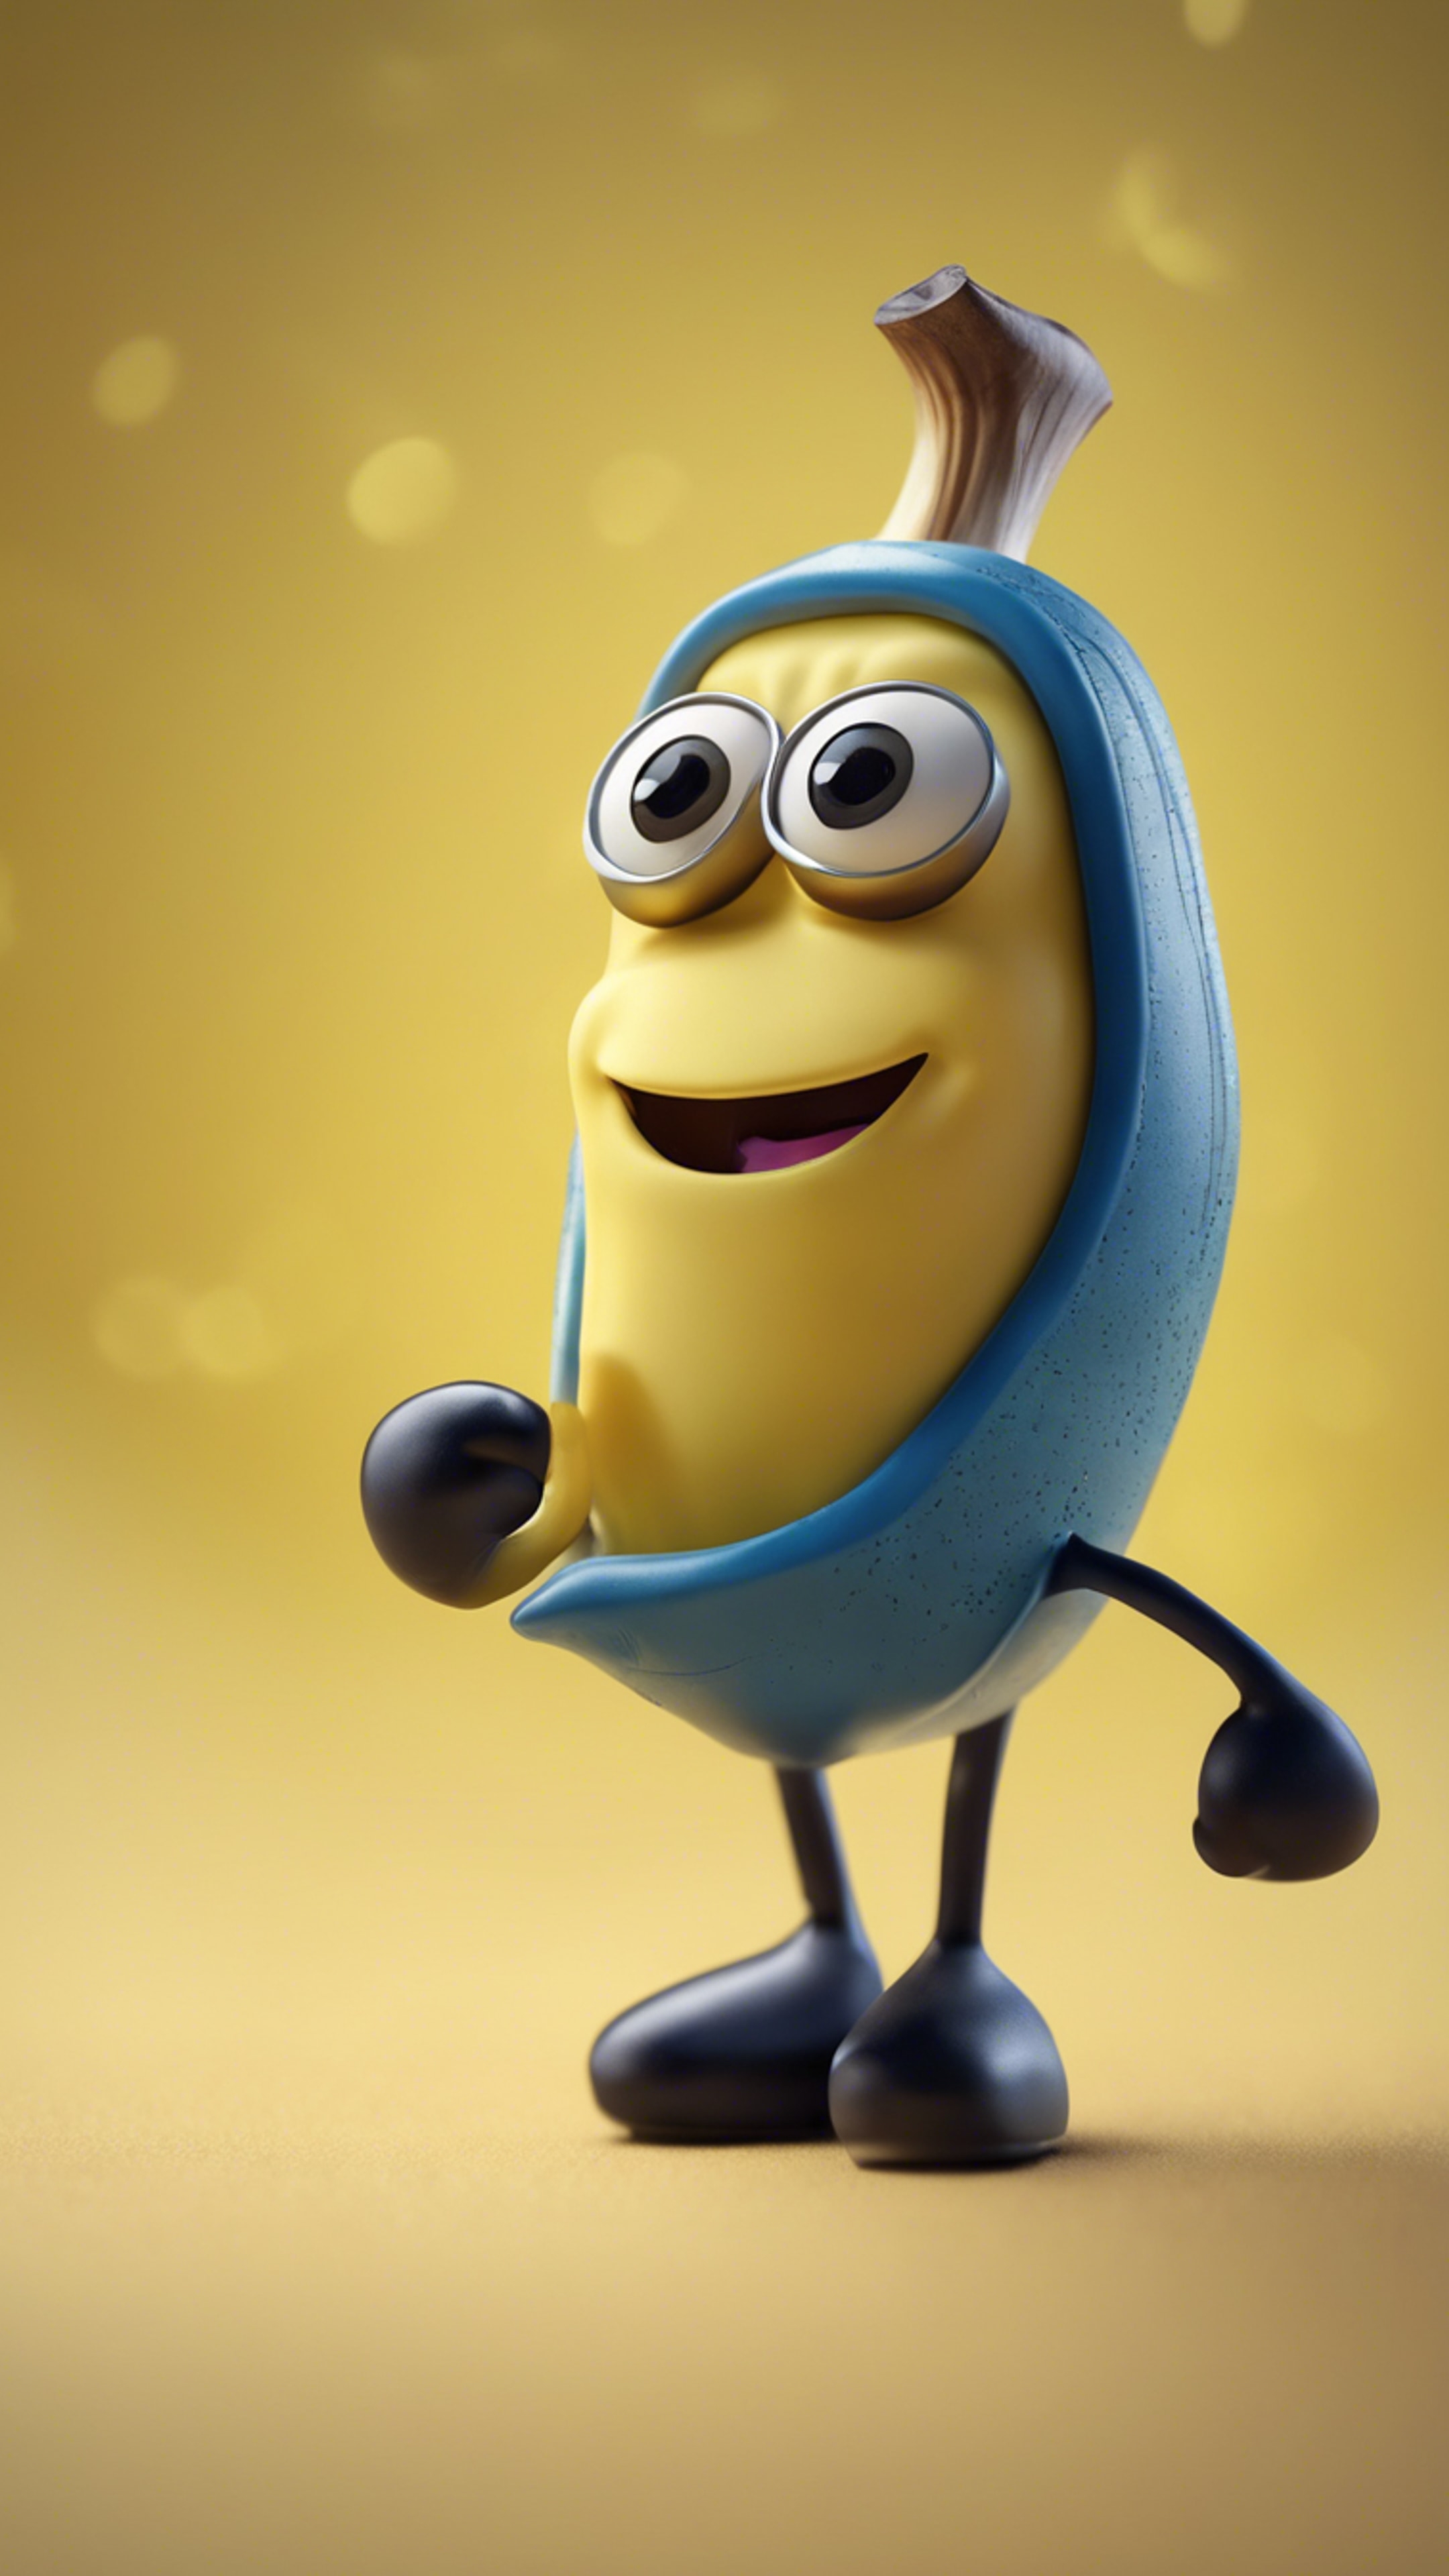 A banana animated character in a kids TV show. ផ្ទាំង​រូបភាព[134047b32d7e4822af7d]